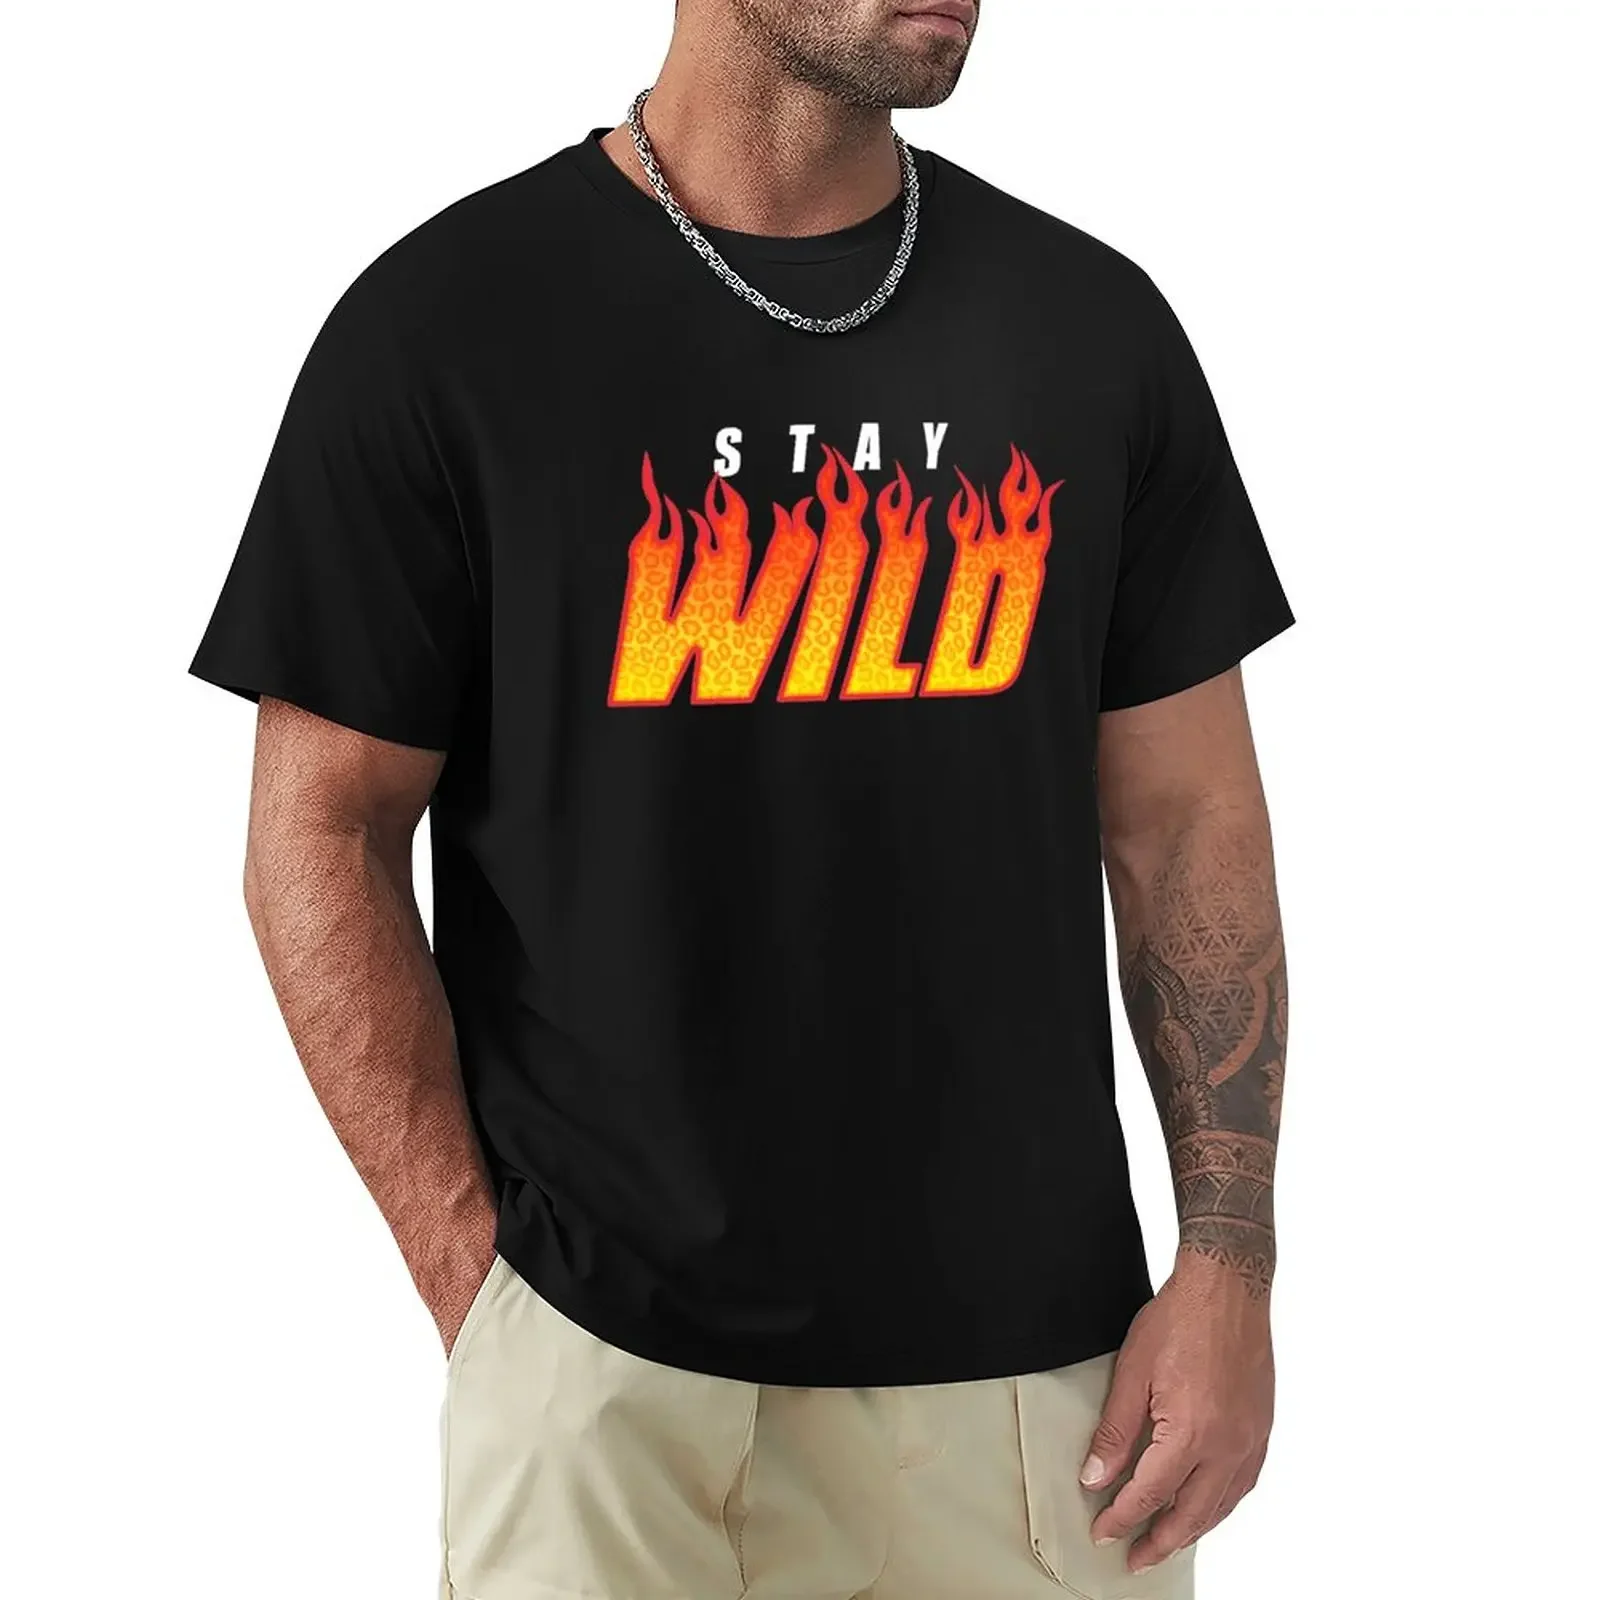 

Stay Wild Fire Merch T-Shirt Aesthetic clothing blanks sports fans t shirts for men cotton